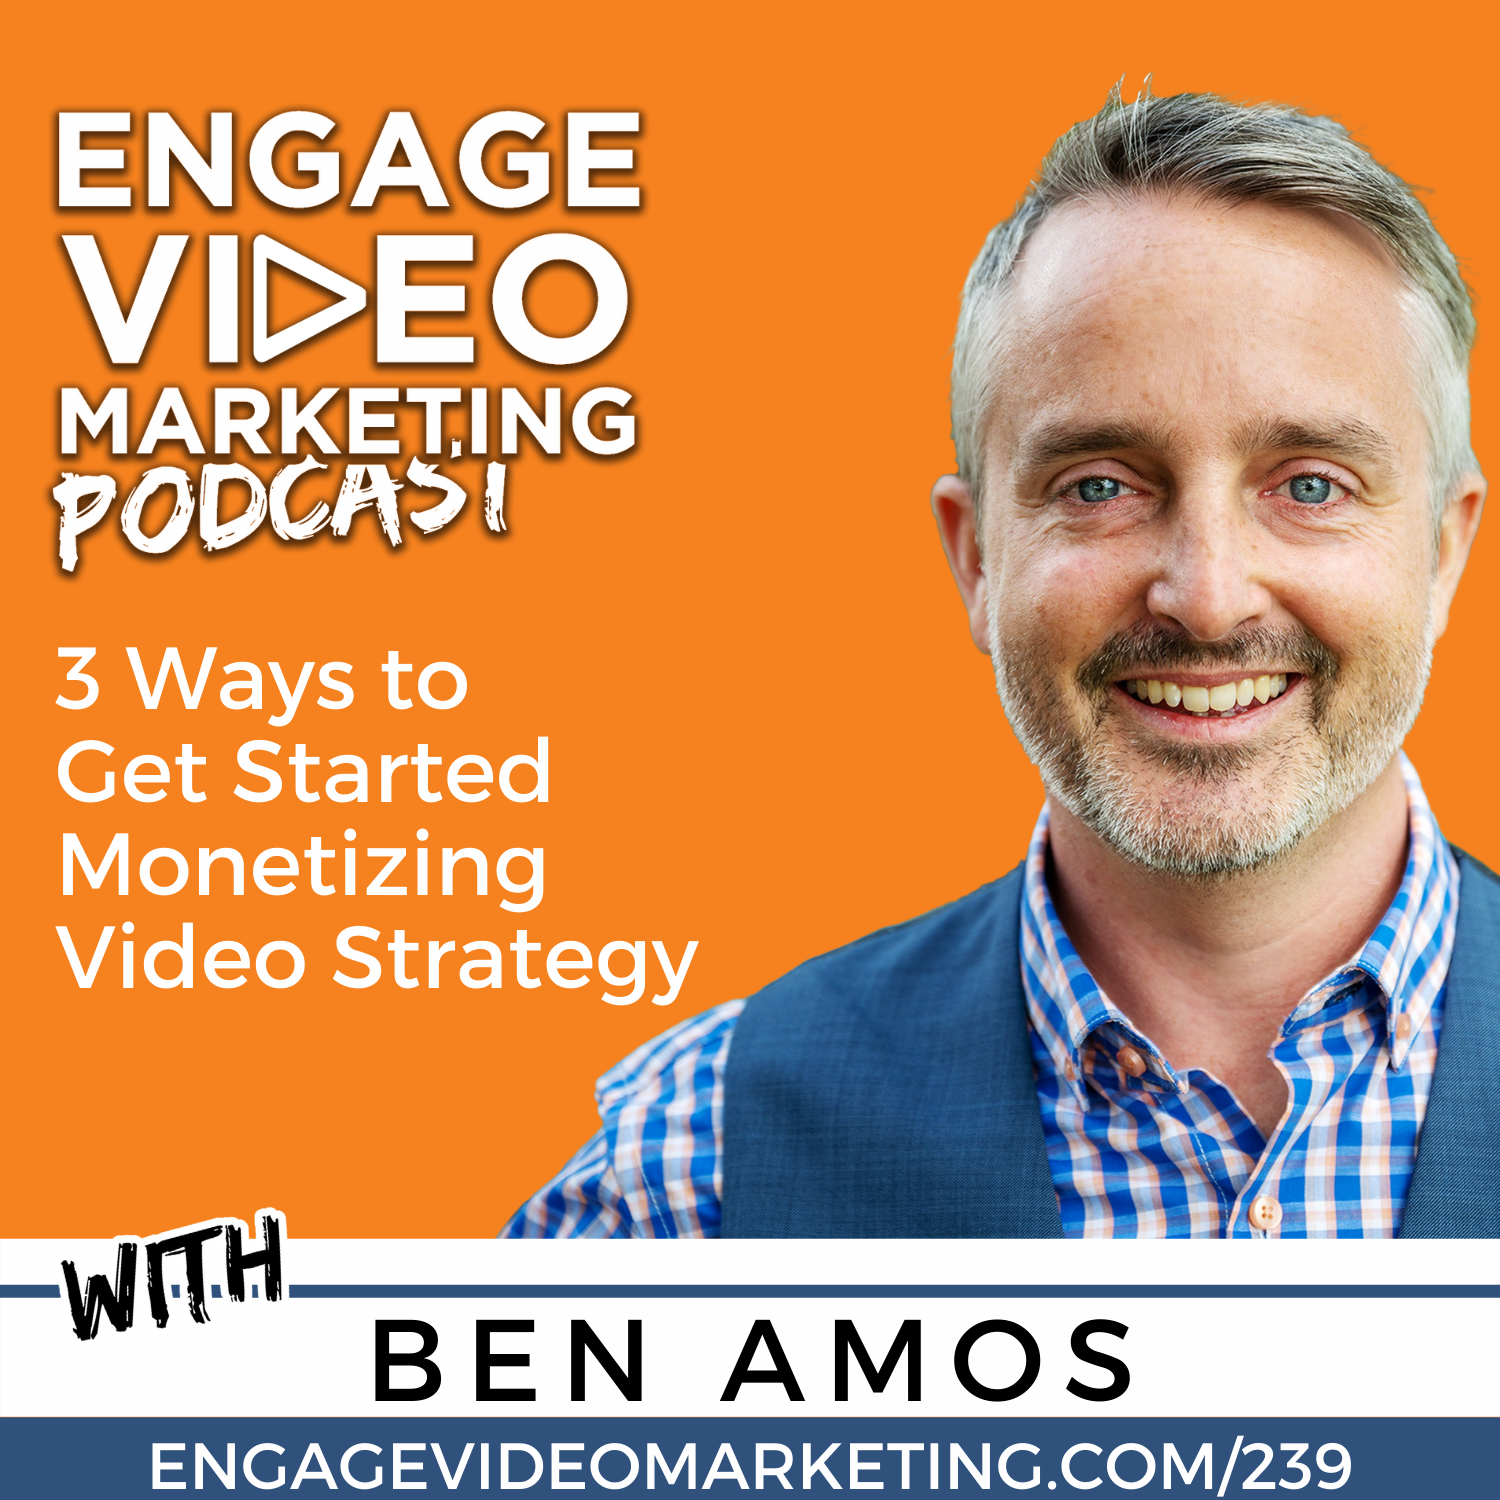 3 Ways to Get Started Monetizing Video Strategy with Ben Amos